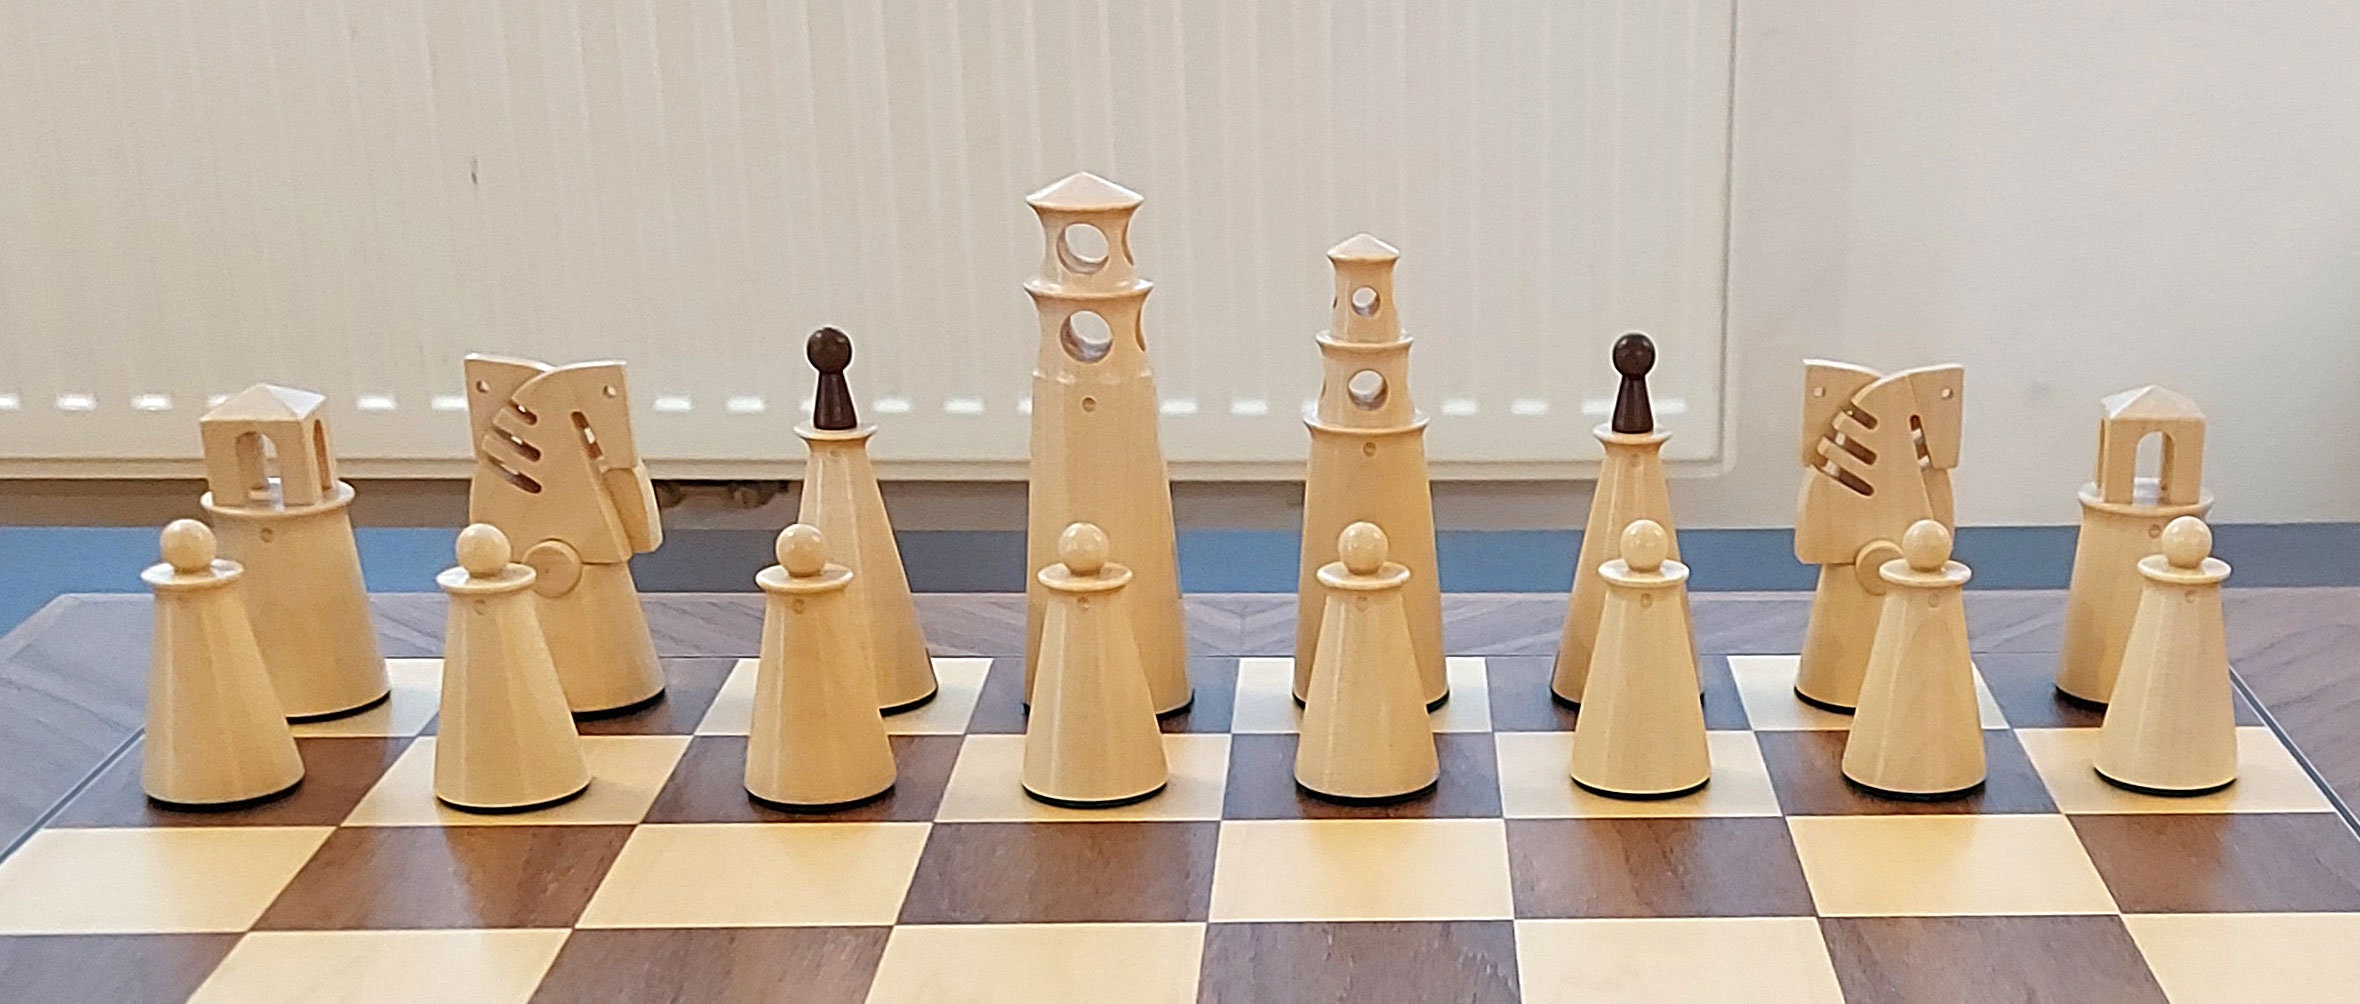 New Idea: Chess + Battle-Royale. (8-players, Epic Gameplay) - Chess Forums  